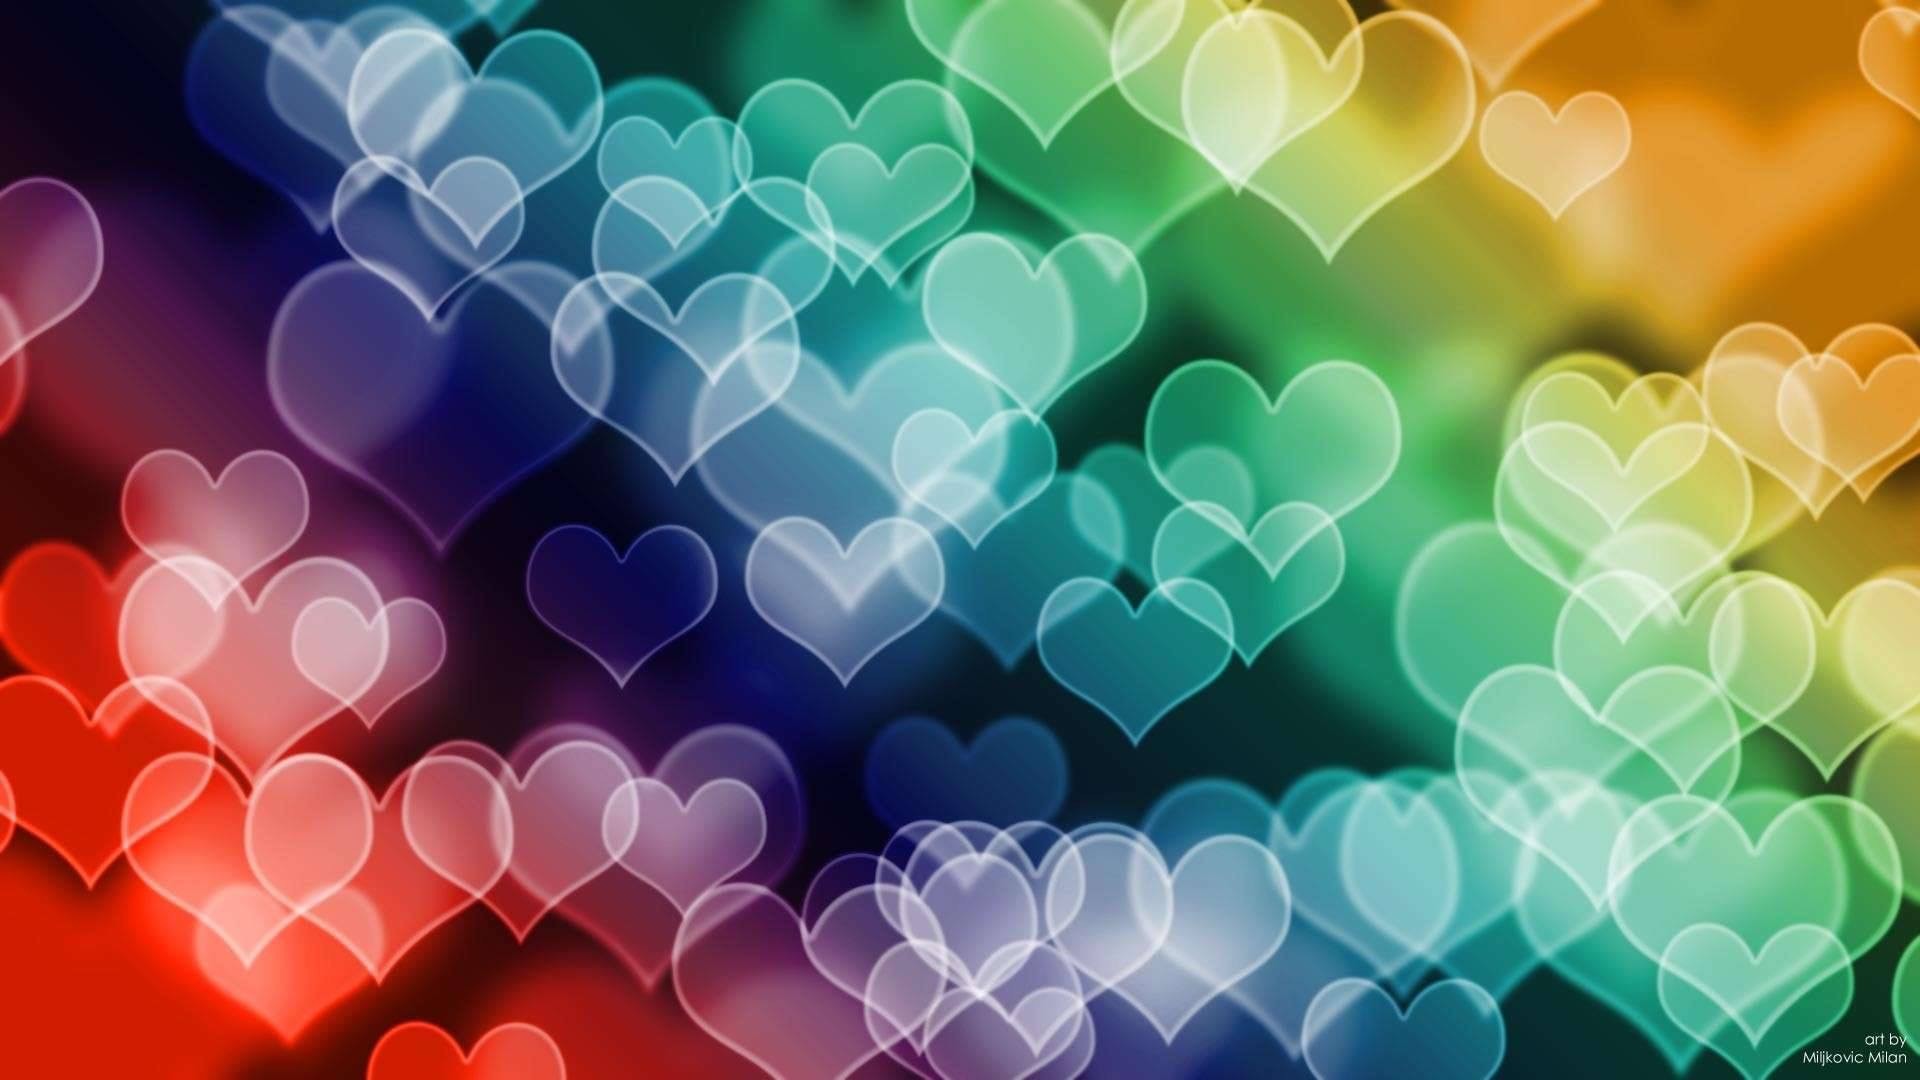 Colored Hearts HD Wallpaper in Full HD from the Valentine's Day category.